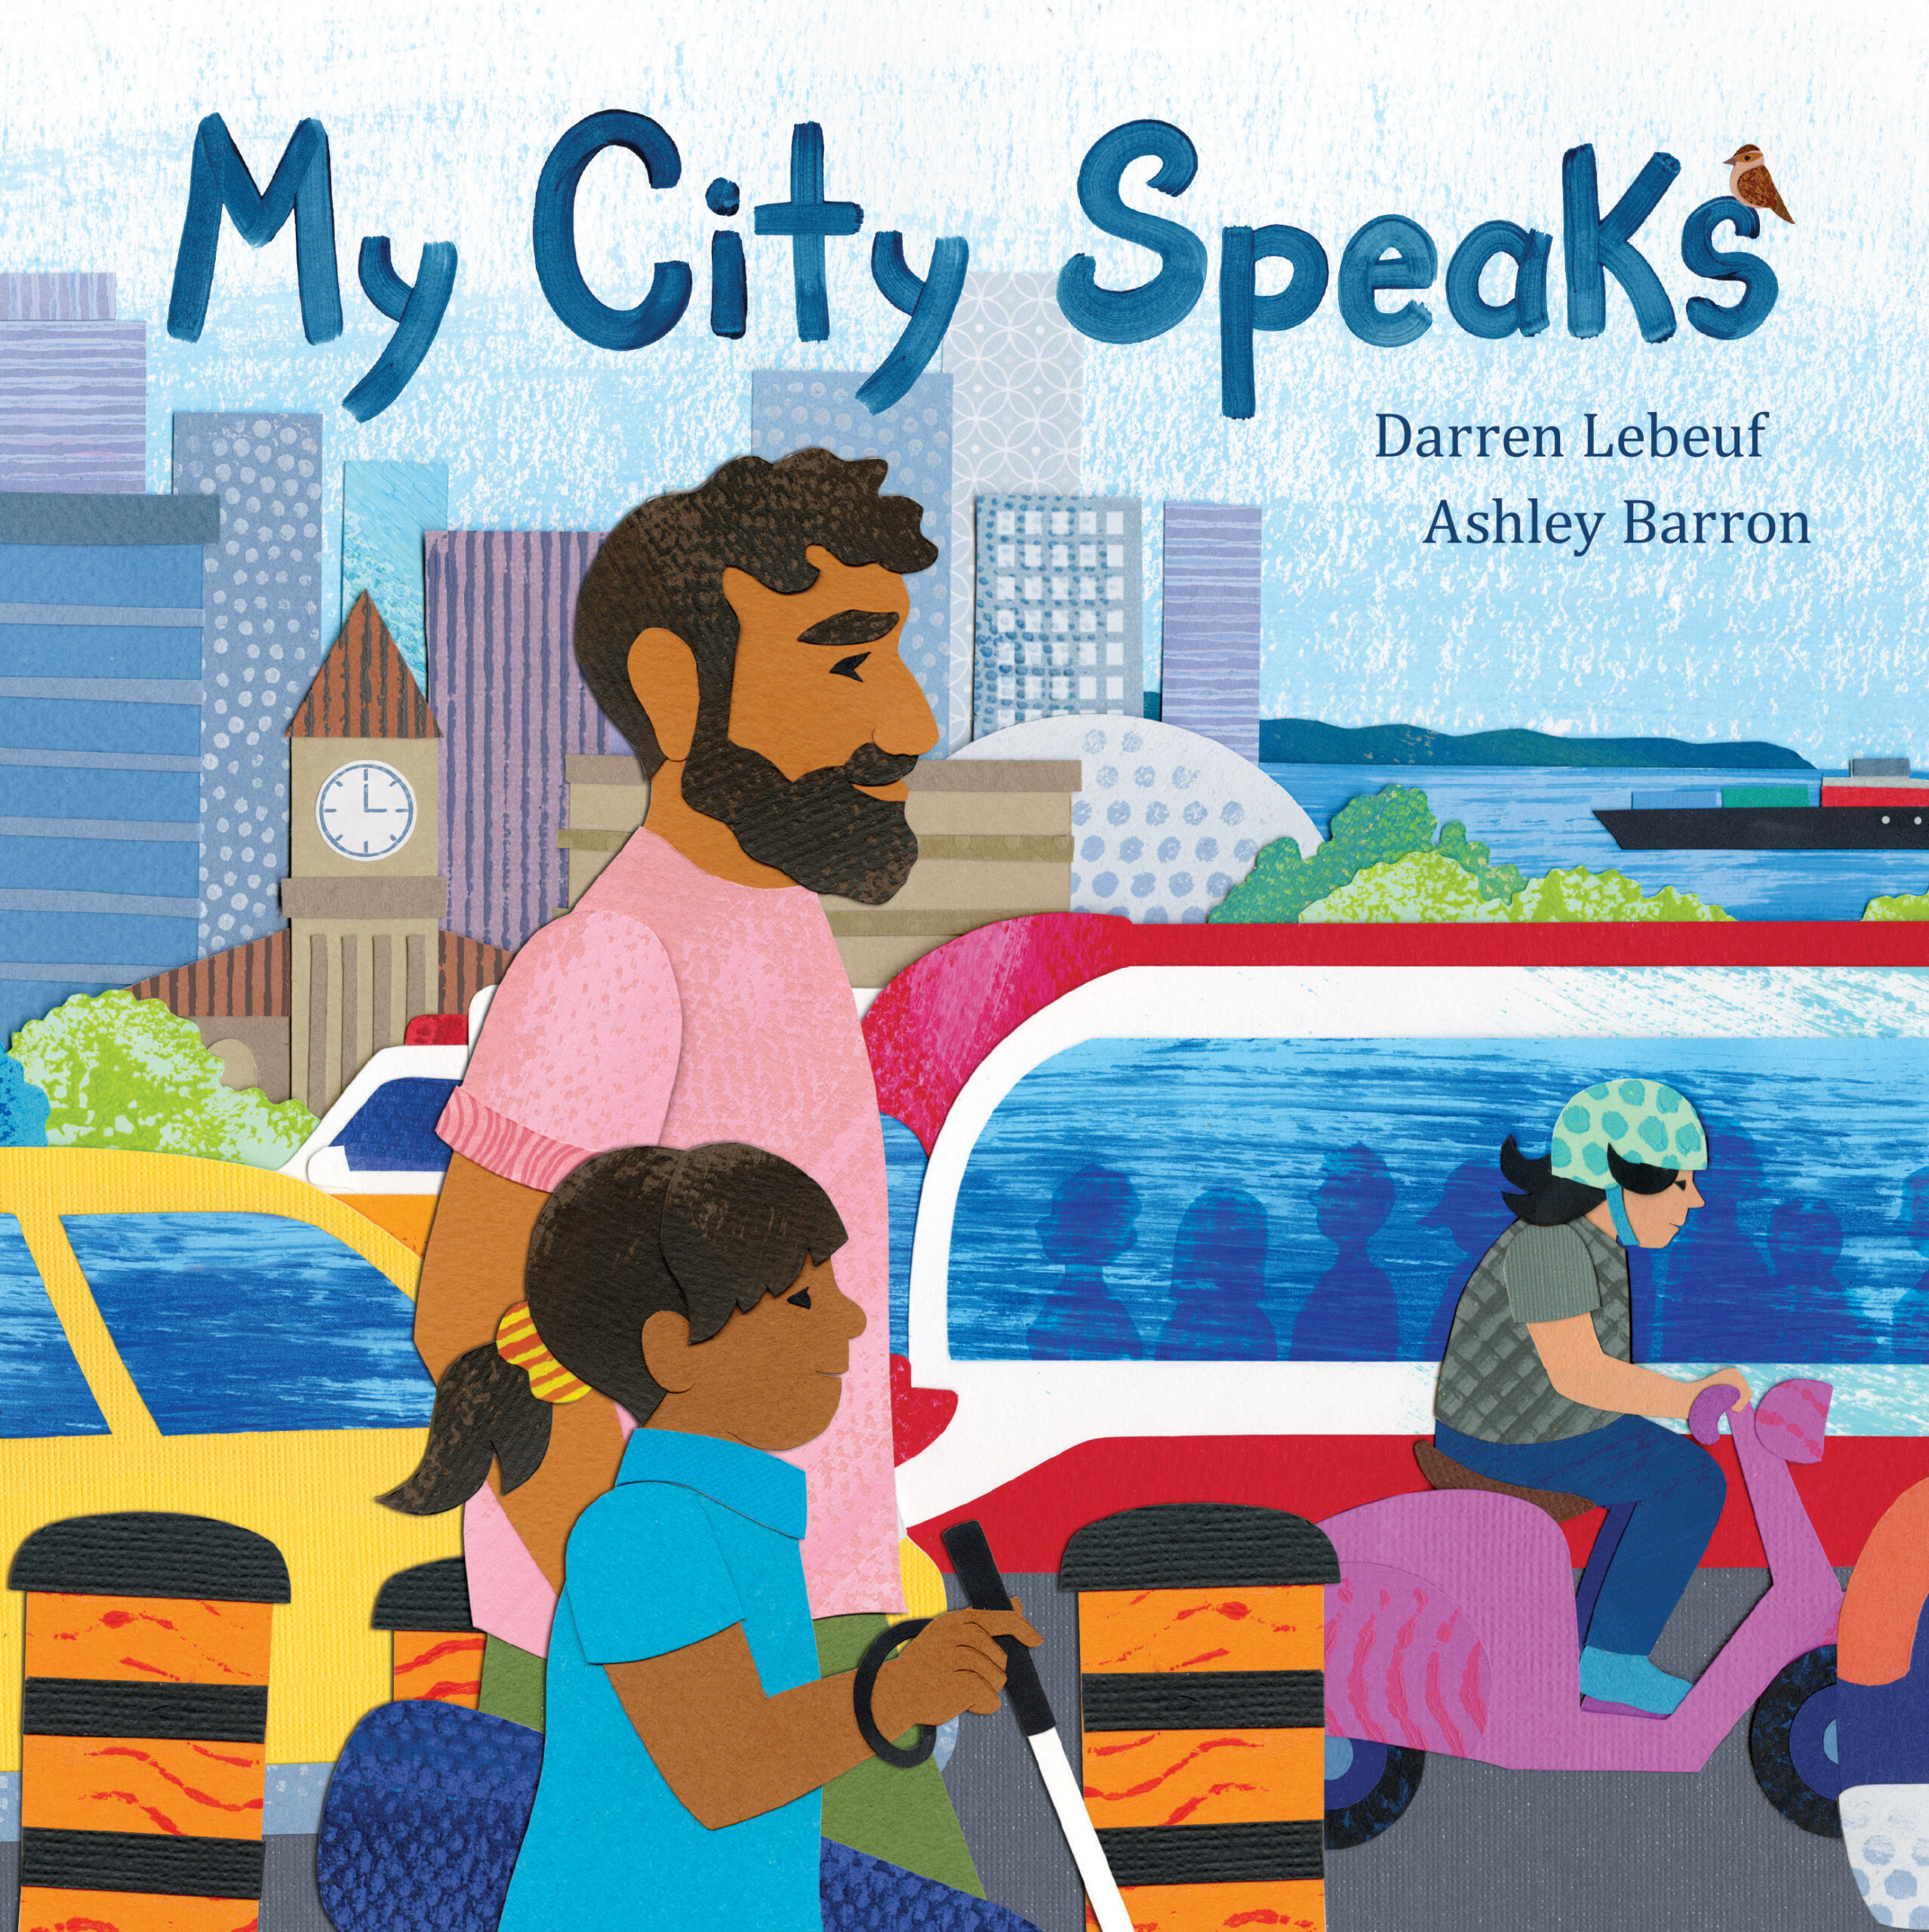 My City Speaks book cover